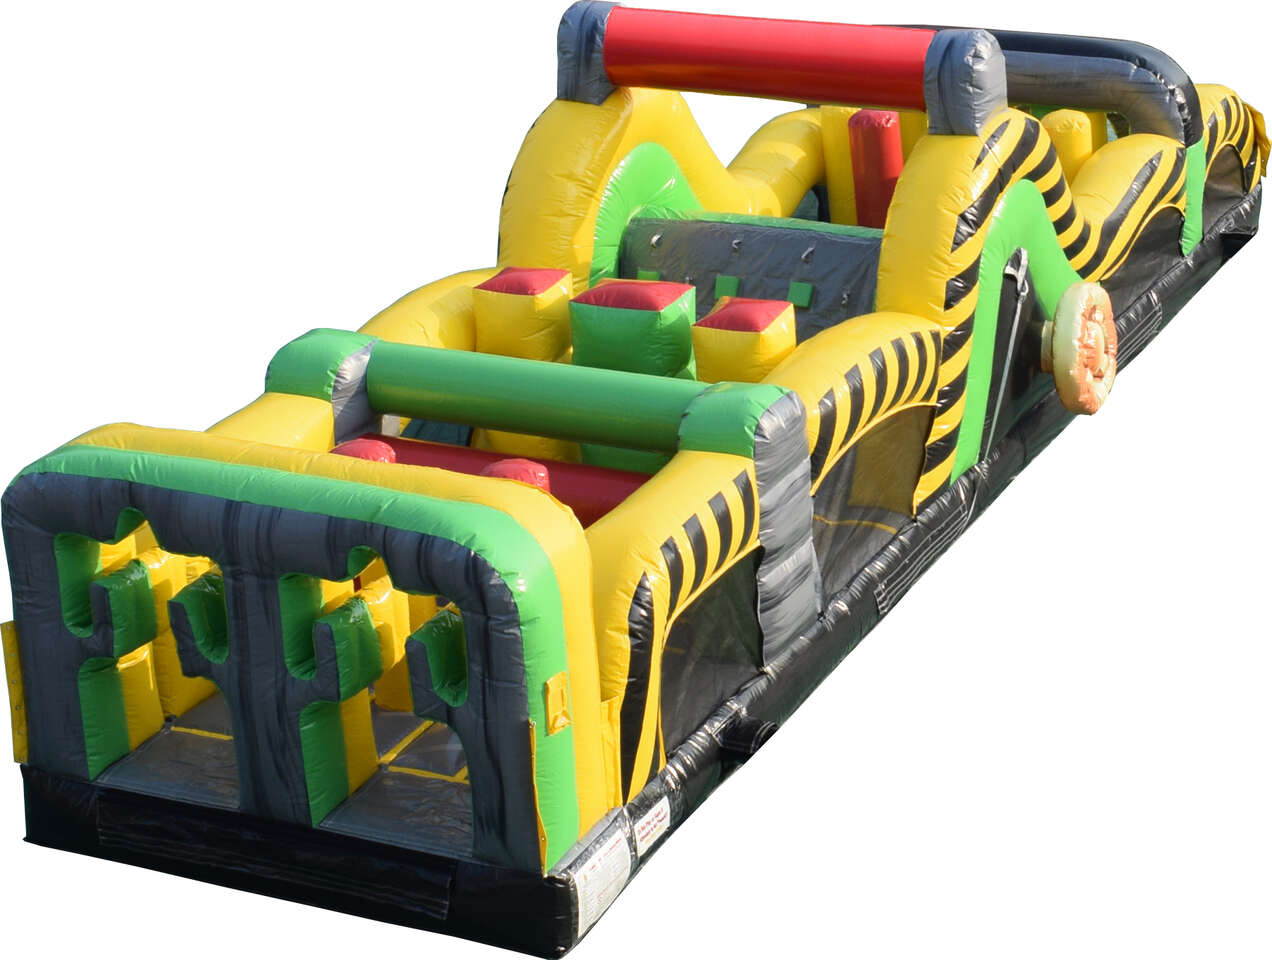 Caustic Obstacle Course Rental Chicago & Suburbs, Inflatable Obstacle Course Rental